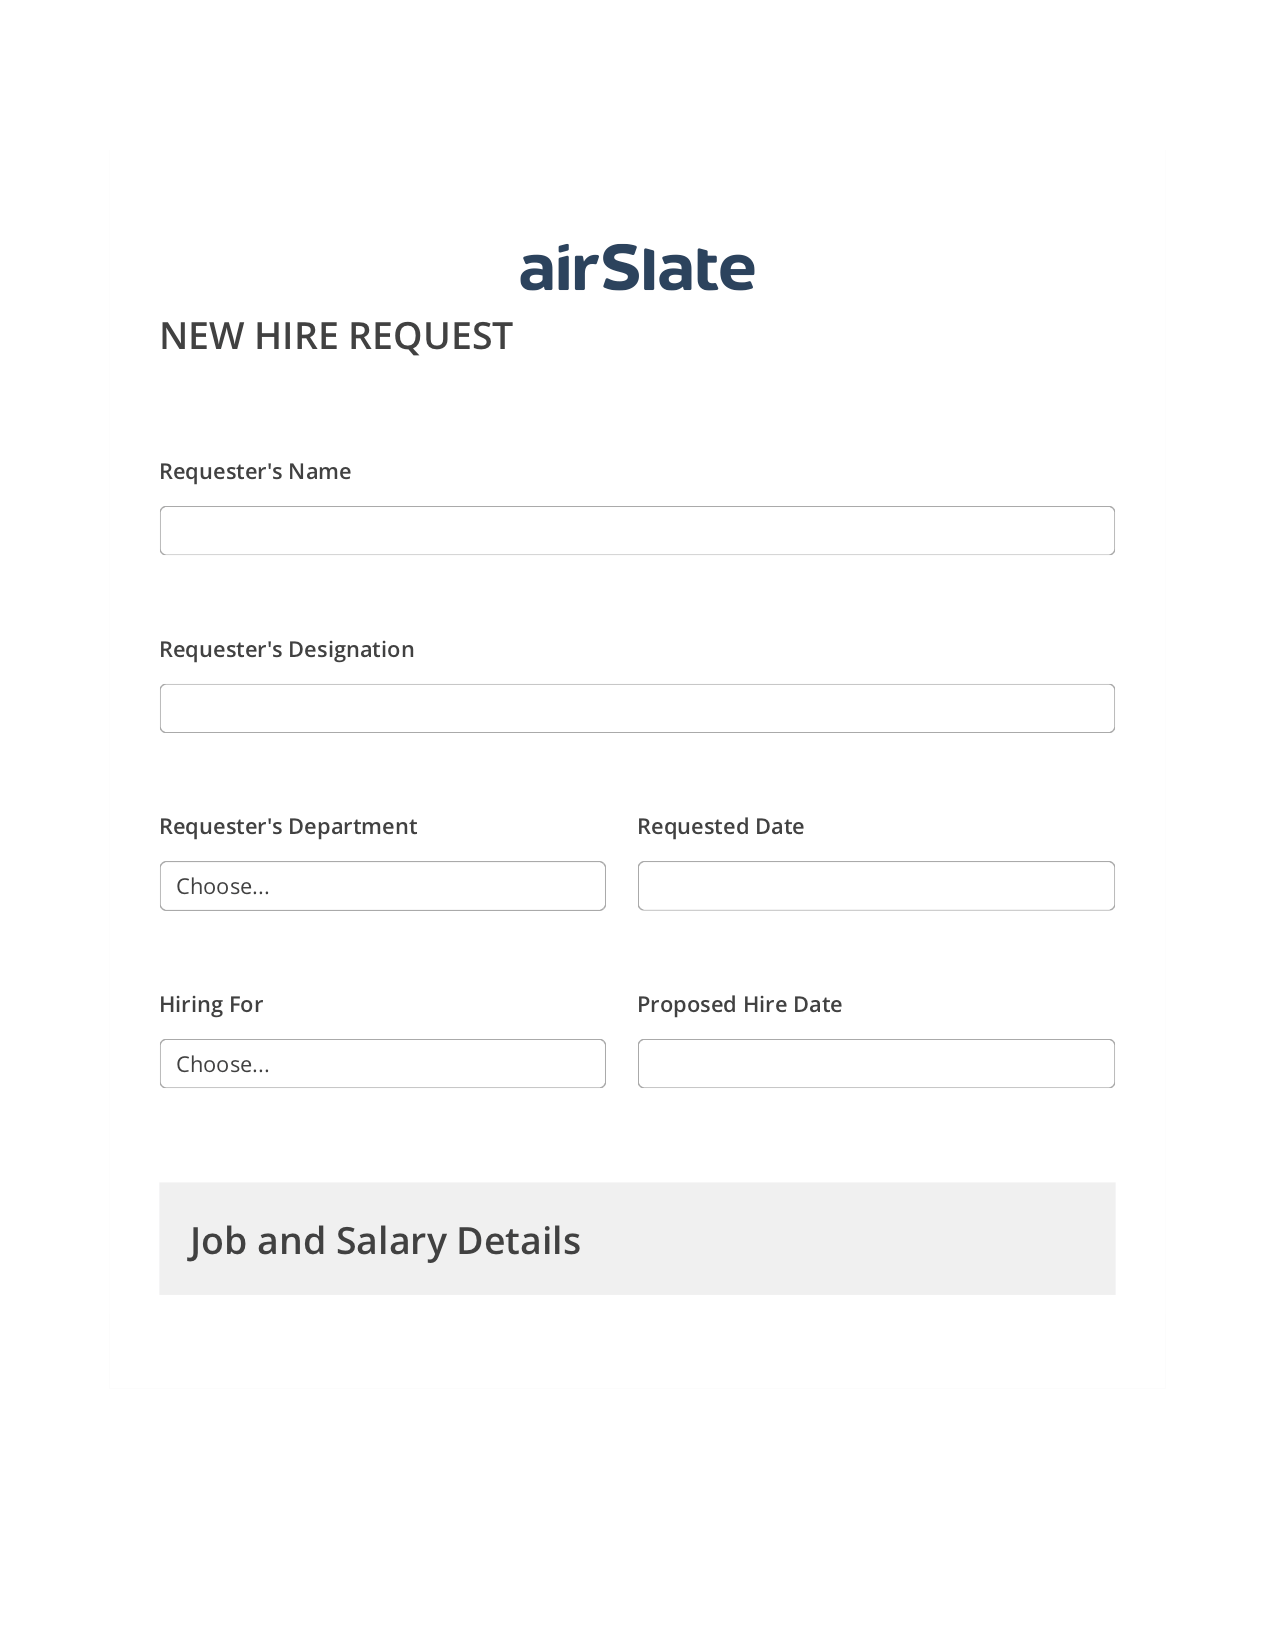 Hiring Request Workflow Pre-fill from Excel Spreadsheet Bot, Remove Tags From Slate Bot, Export to WebMerge Bot